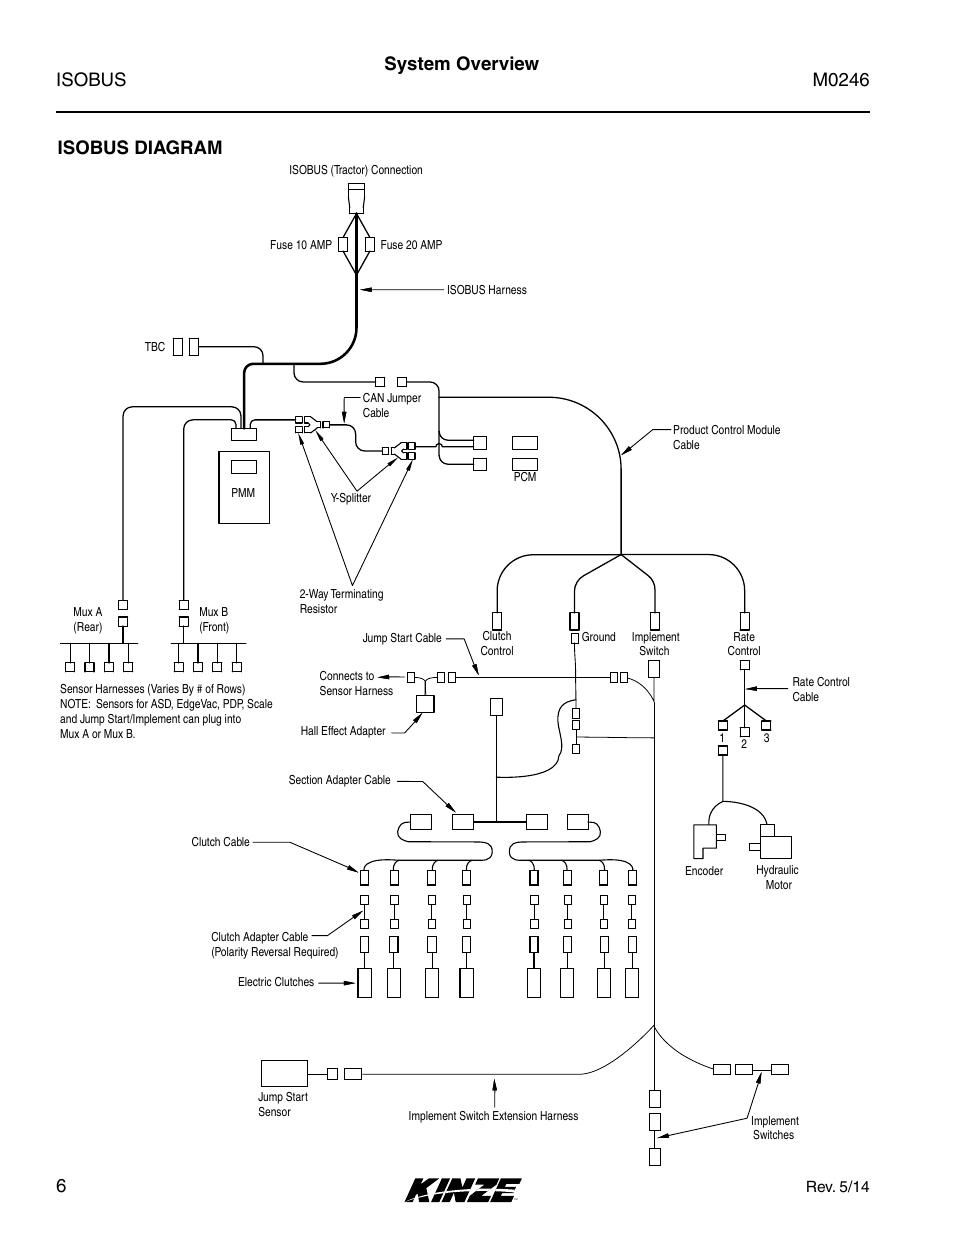 Isobus diagram, System overview isobus diagram | Kinze ISOBUS Electronics Package (3000 Series) Rev. 5/14 User Manual | Page 12 / 46